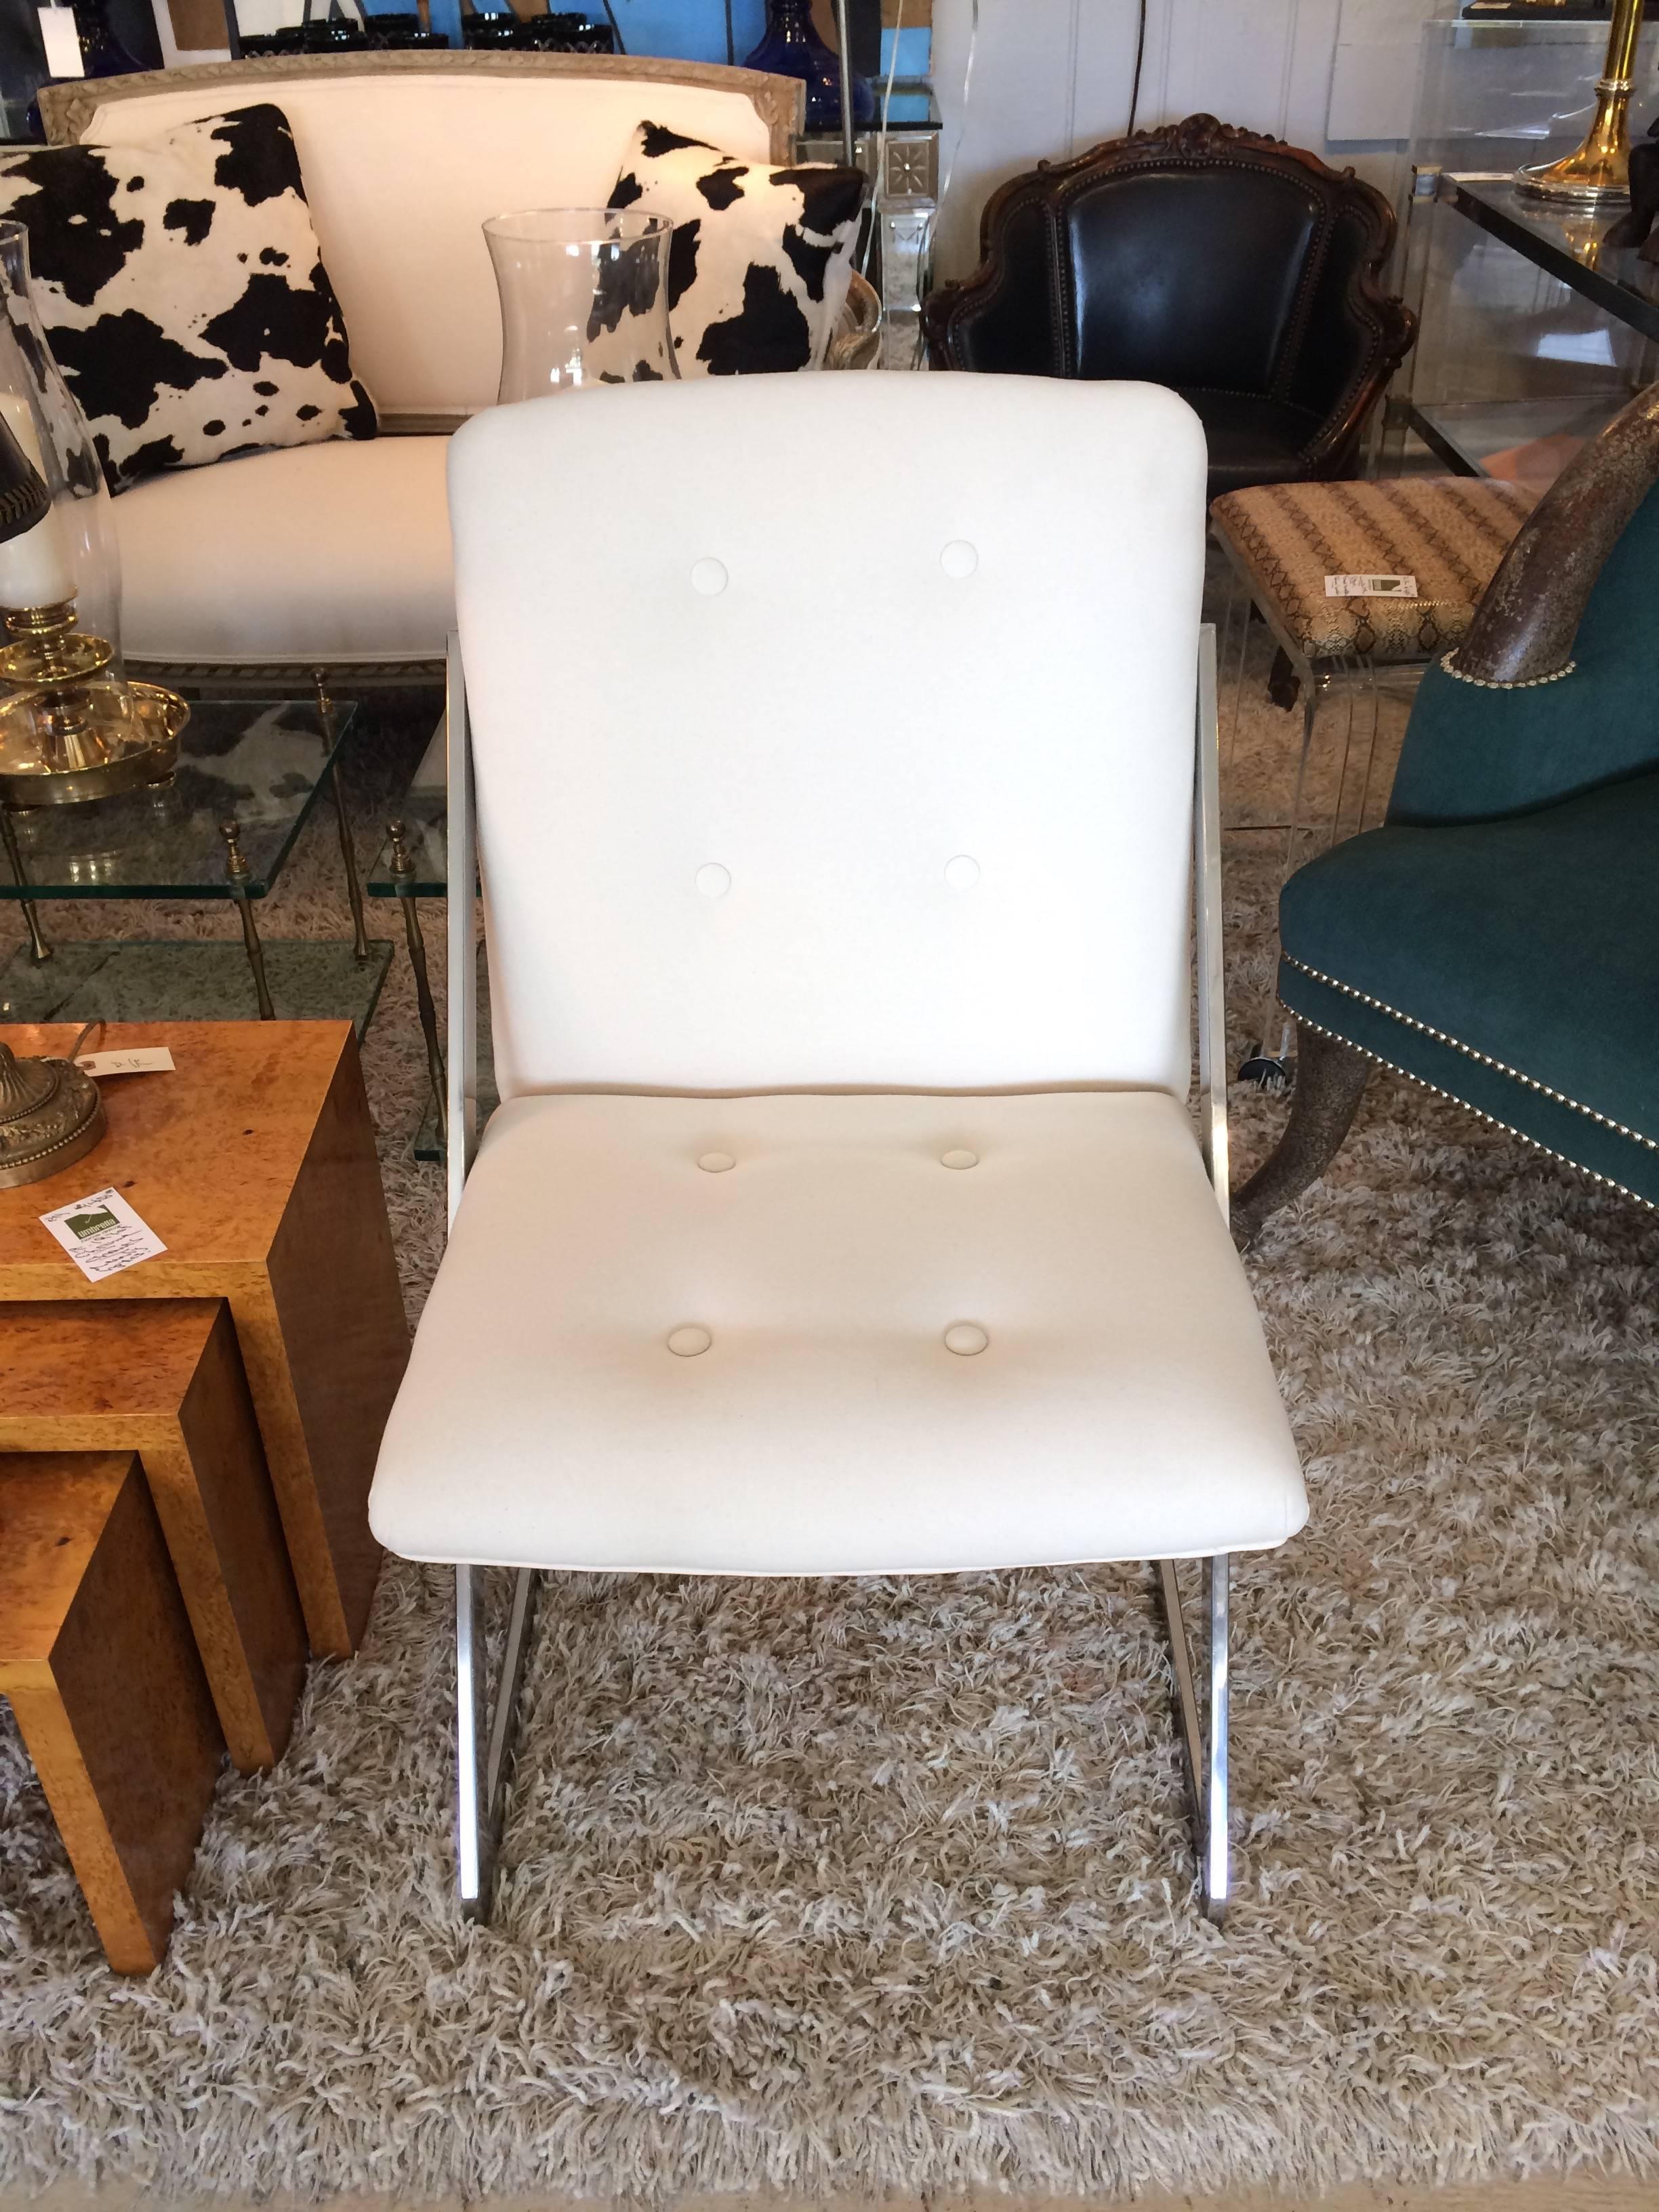 American Sleek Pair of Chrome and White Duck Mid-Century Modern Chairs